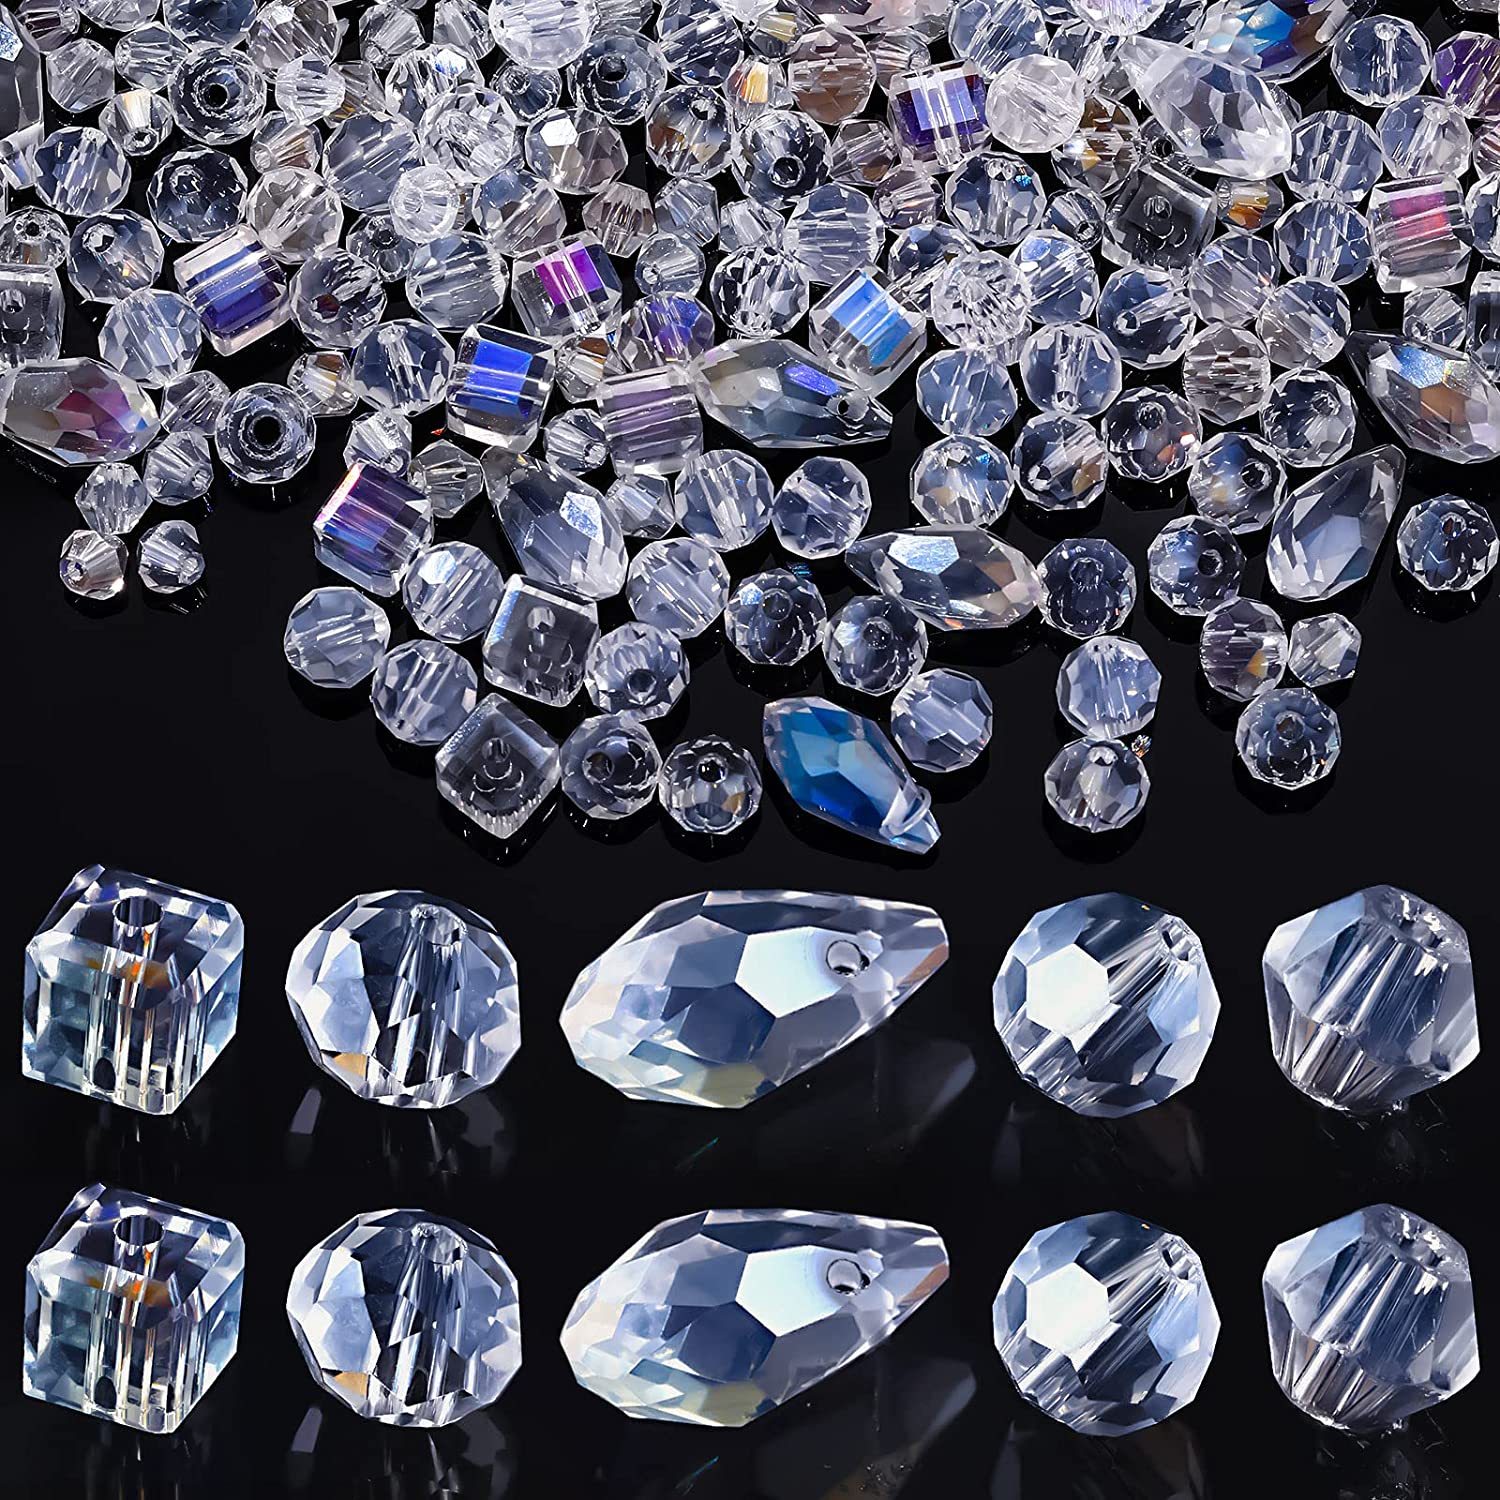 1100 Pieces Crystal Glass Beads for Jewelry Making AB Crystal Faceted Gemstone  Beads Rondelle Bicone Bicone Round Loose Spacer Beads for Craft Chandelier